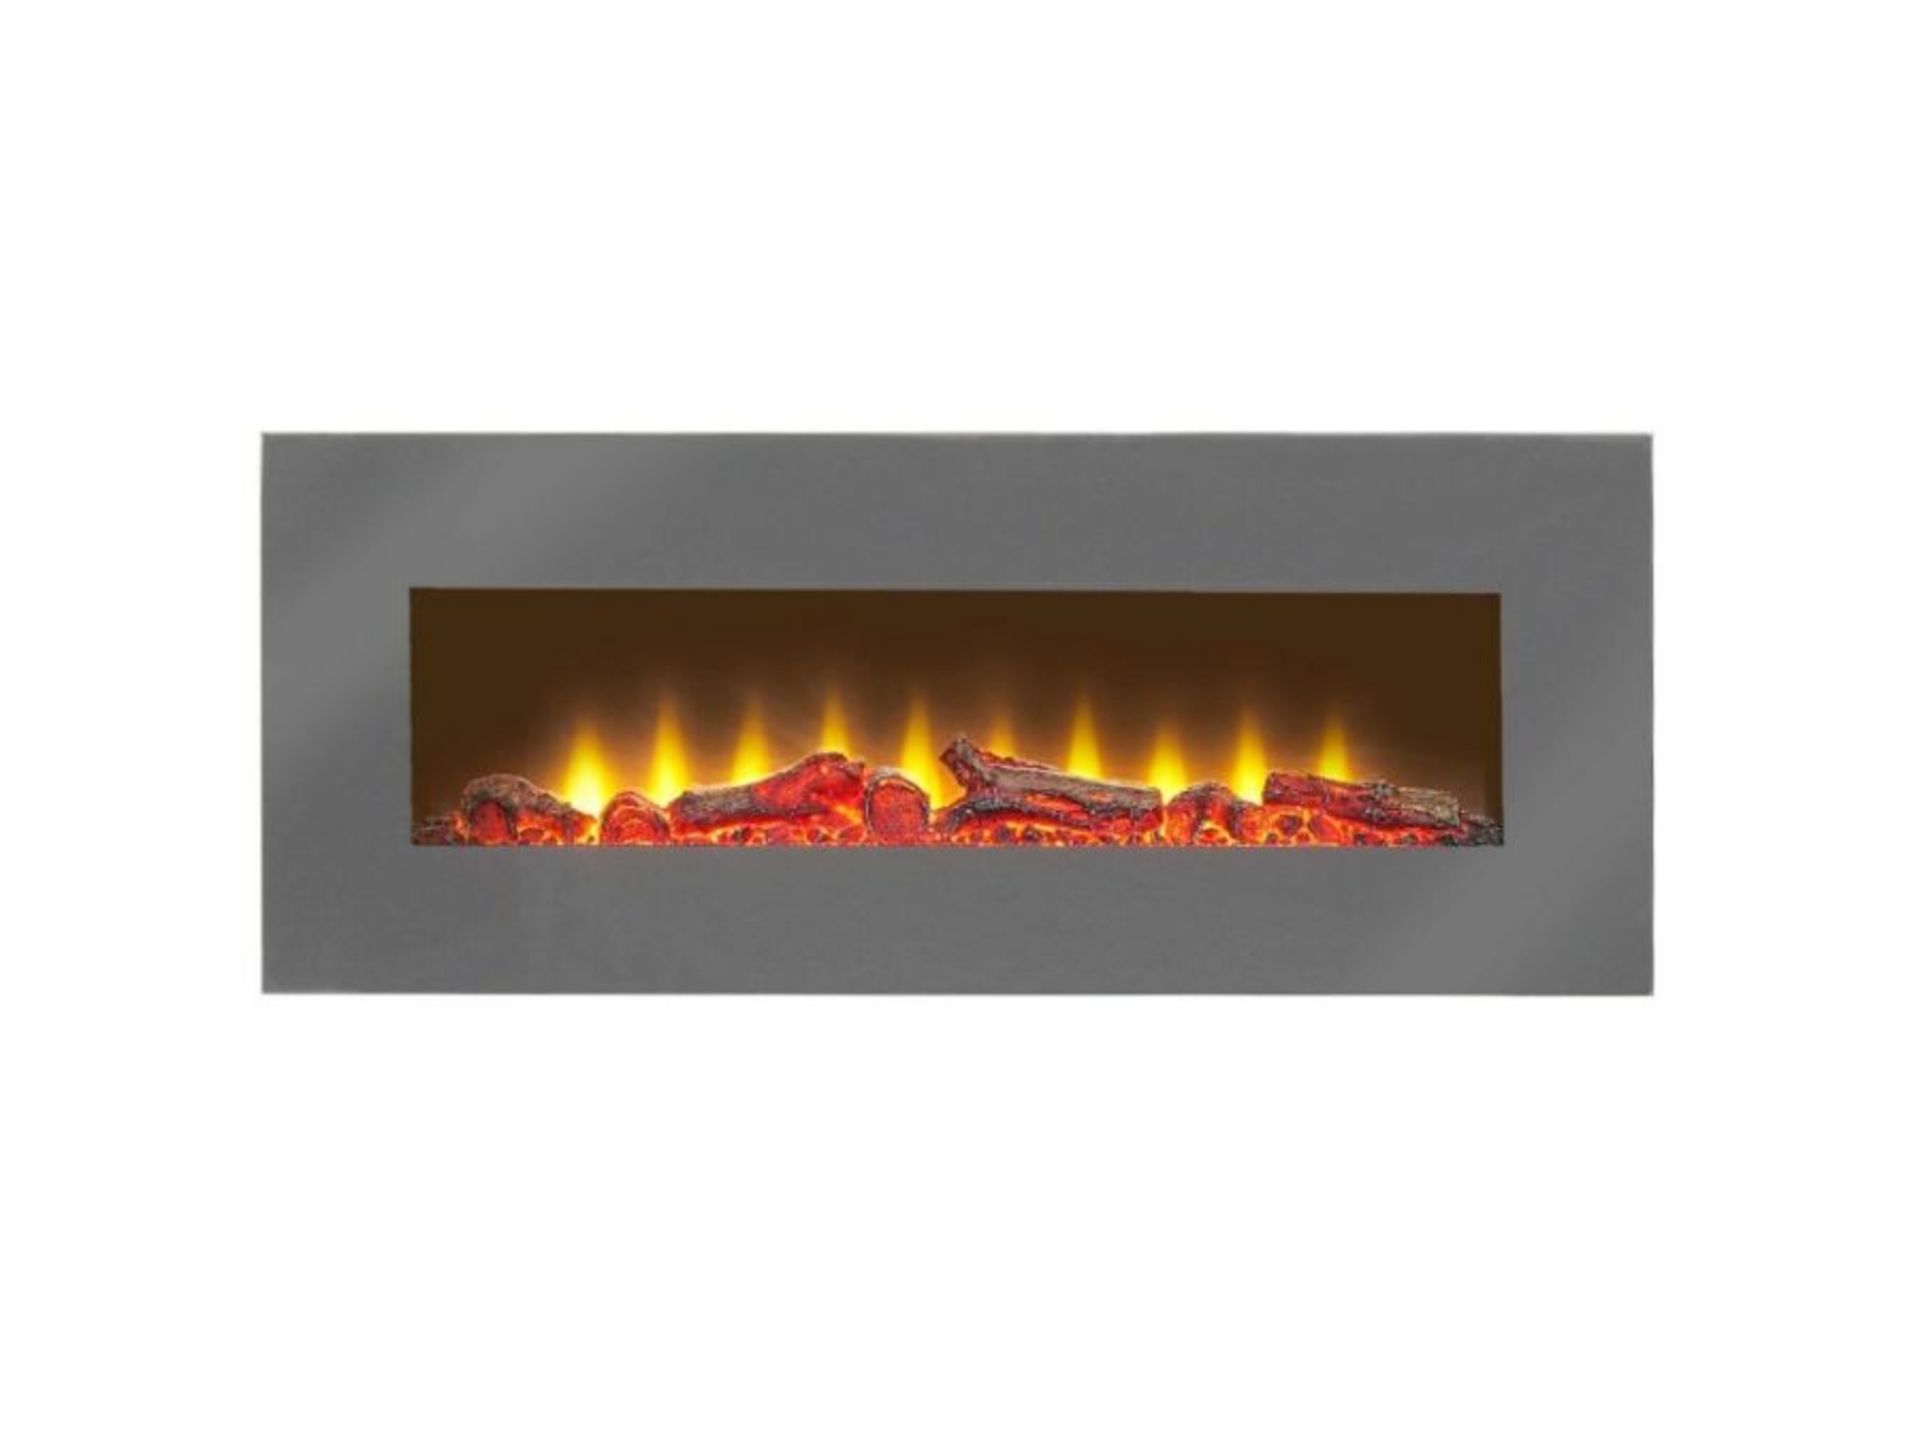 Metro Lane,Grey 42 Inch Electric Fire(GREY BOXED RETURN NOT CHECKED ) RRP -£839.99 (25490/4 -